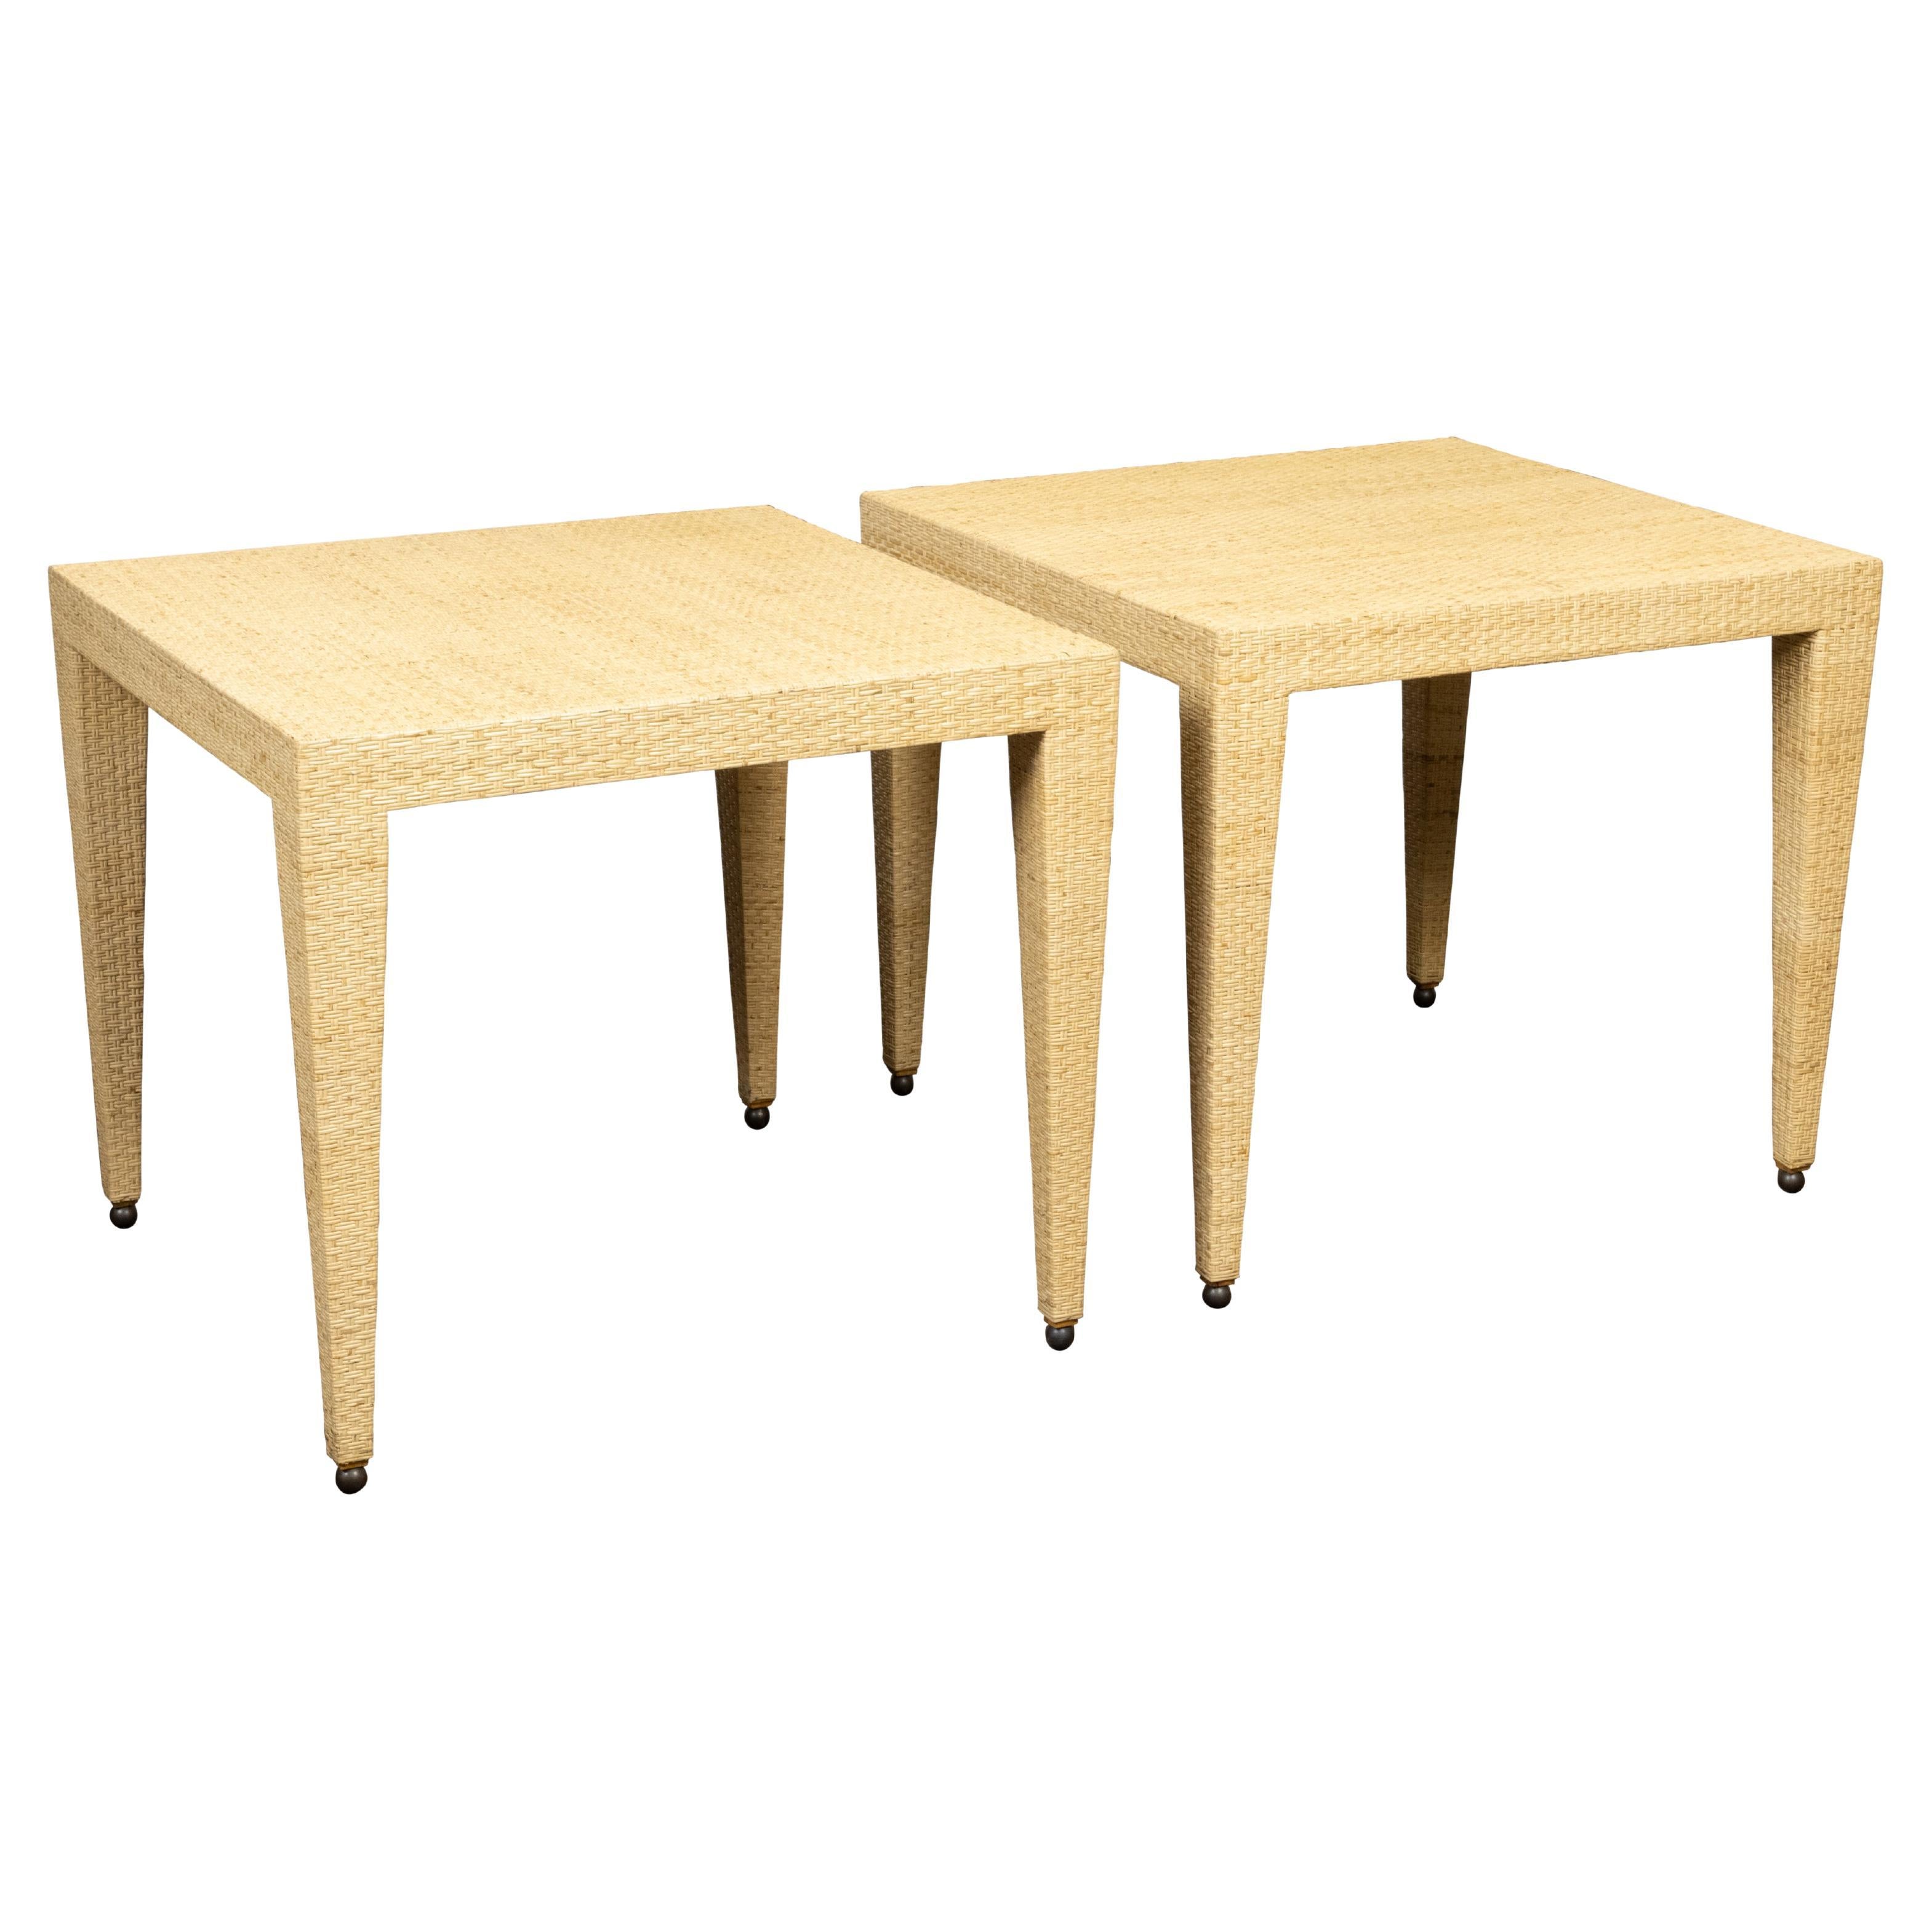 Pair of Baker Furniture Midcentury Wicker Side Tables with Tapered Legs